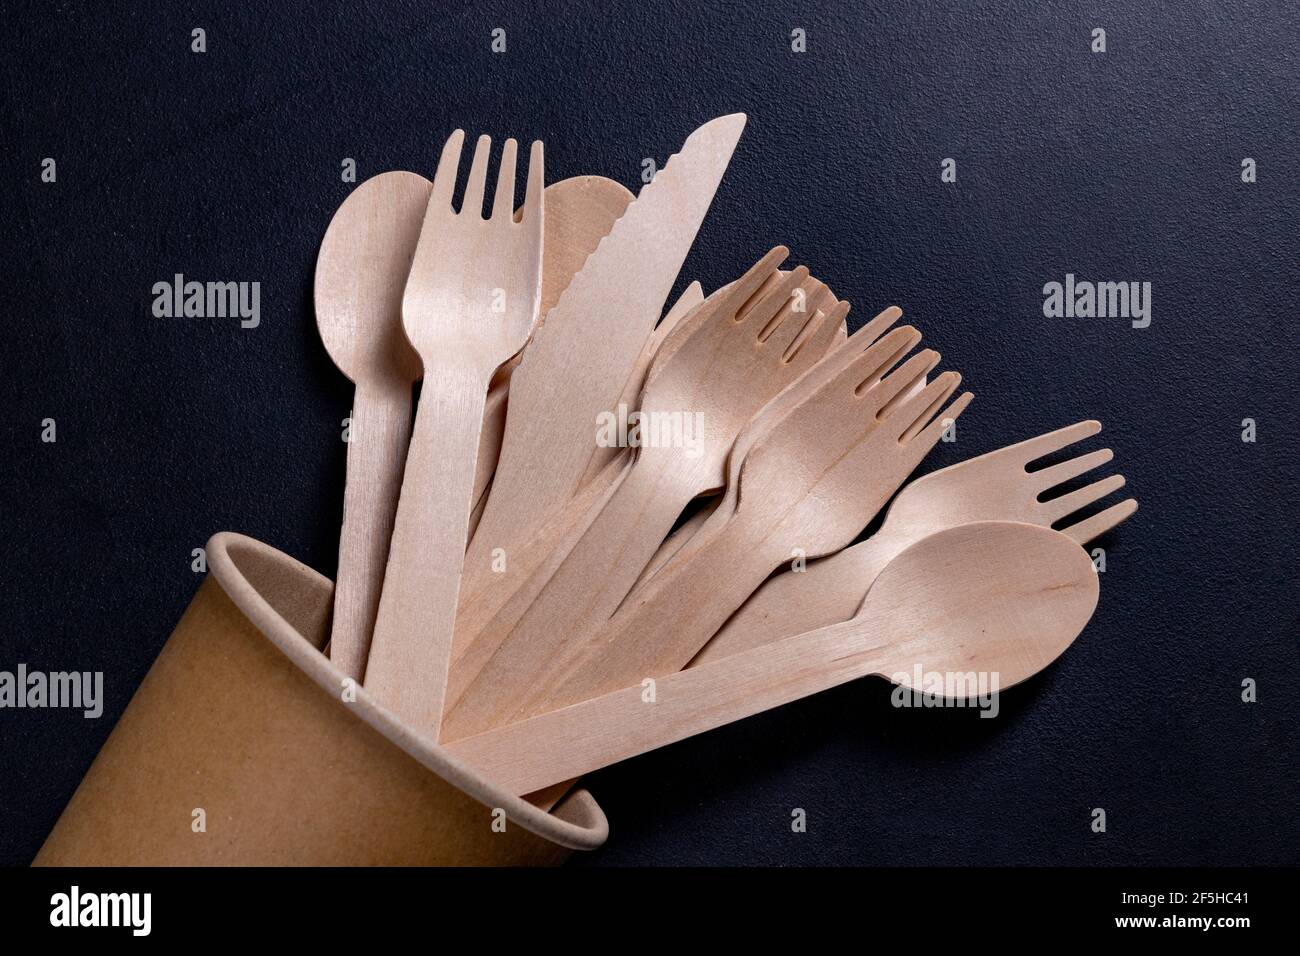 Disposable wooden cutlery and cardboard containers. Accessories for eating outdoors. Dark background. Stock Photo